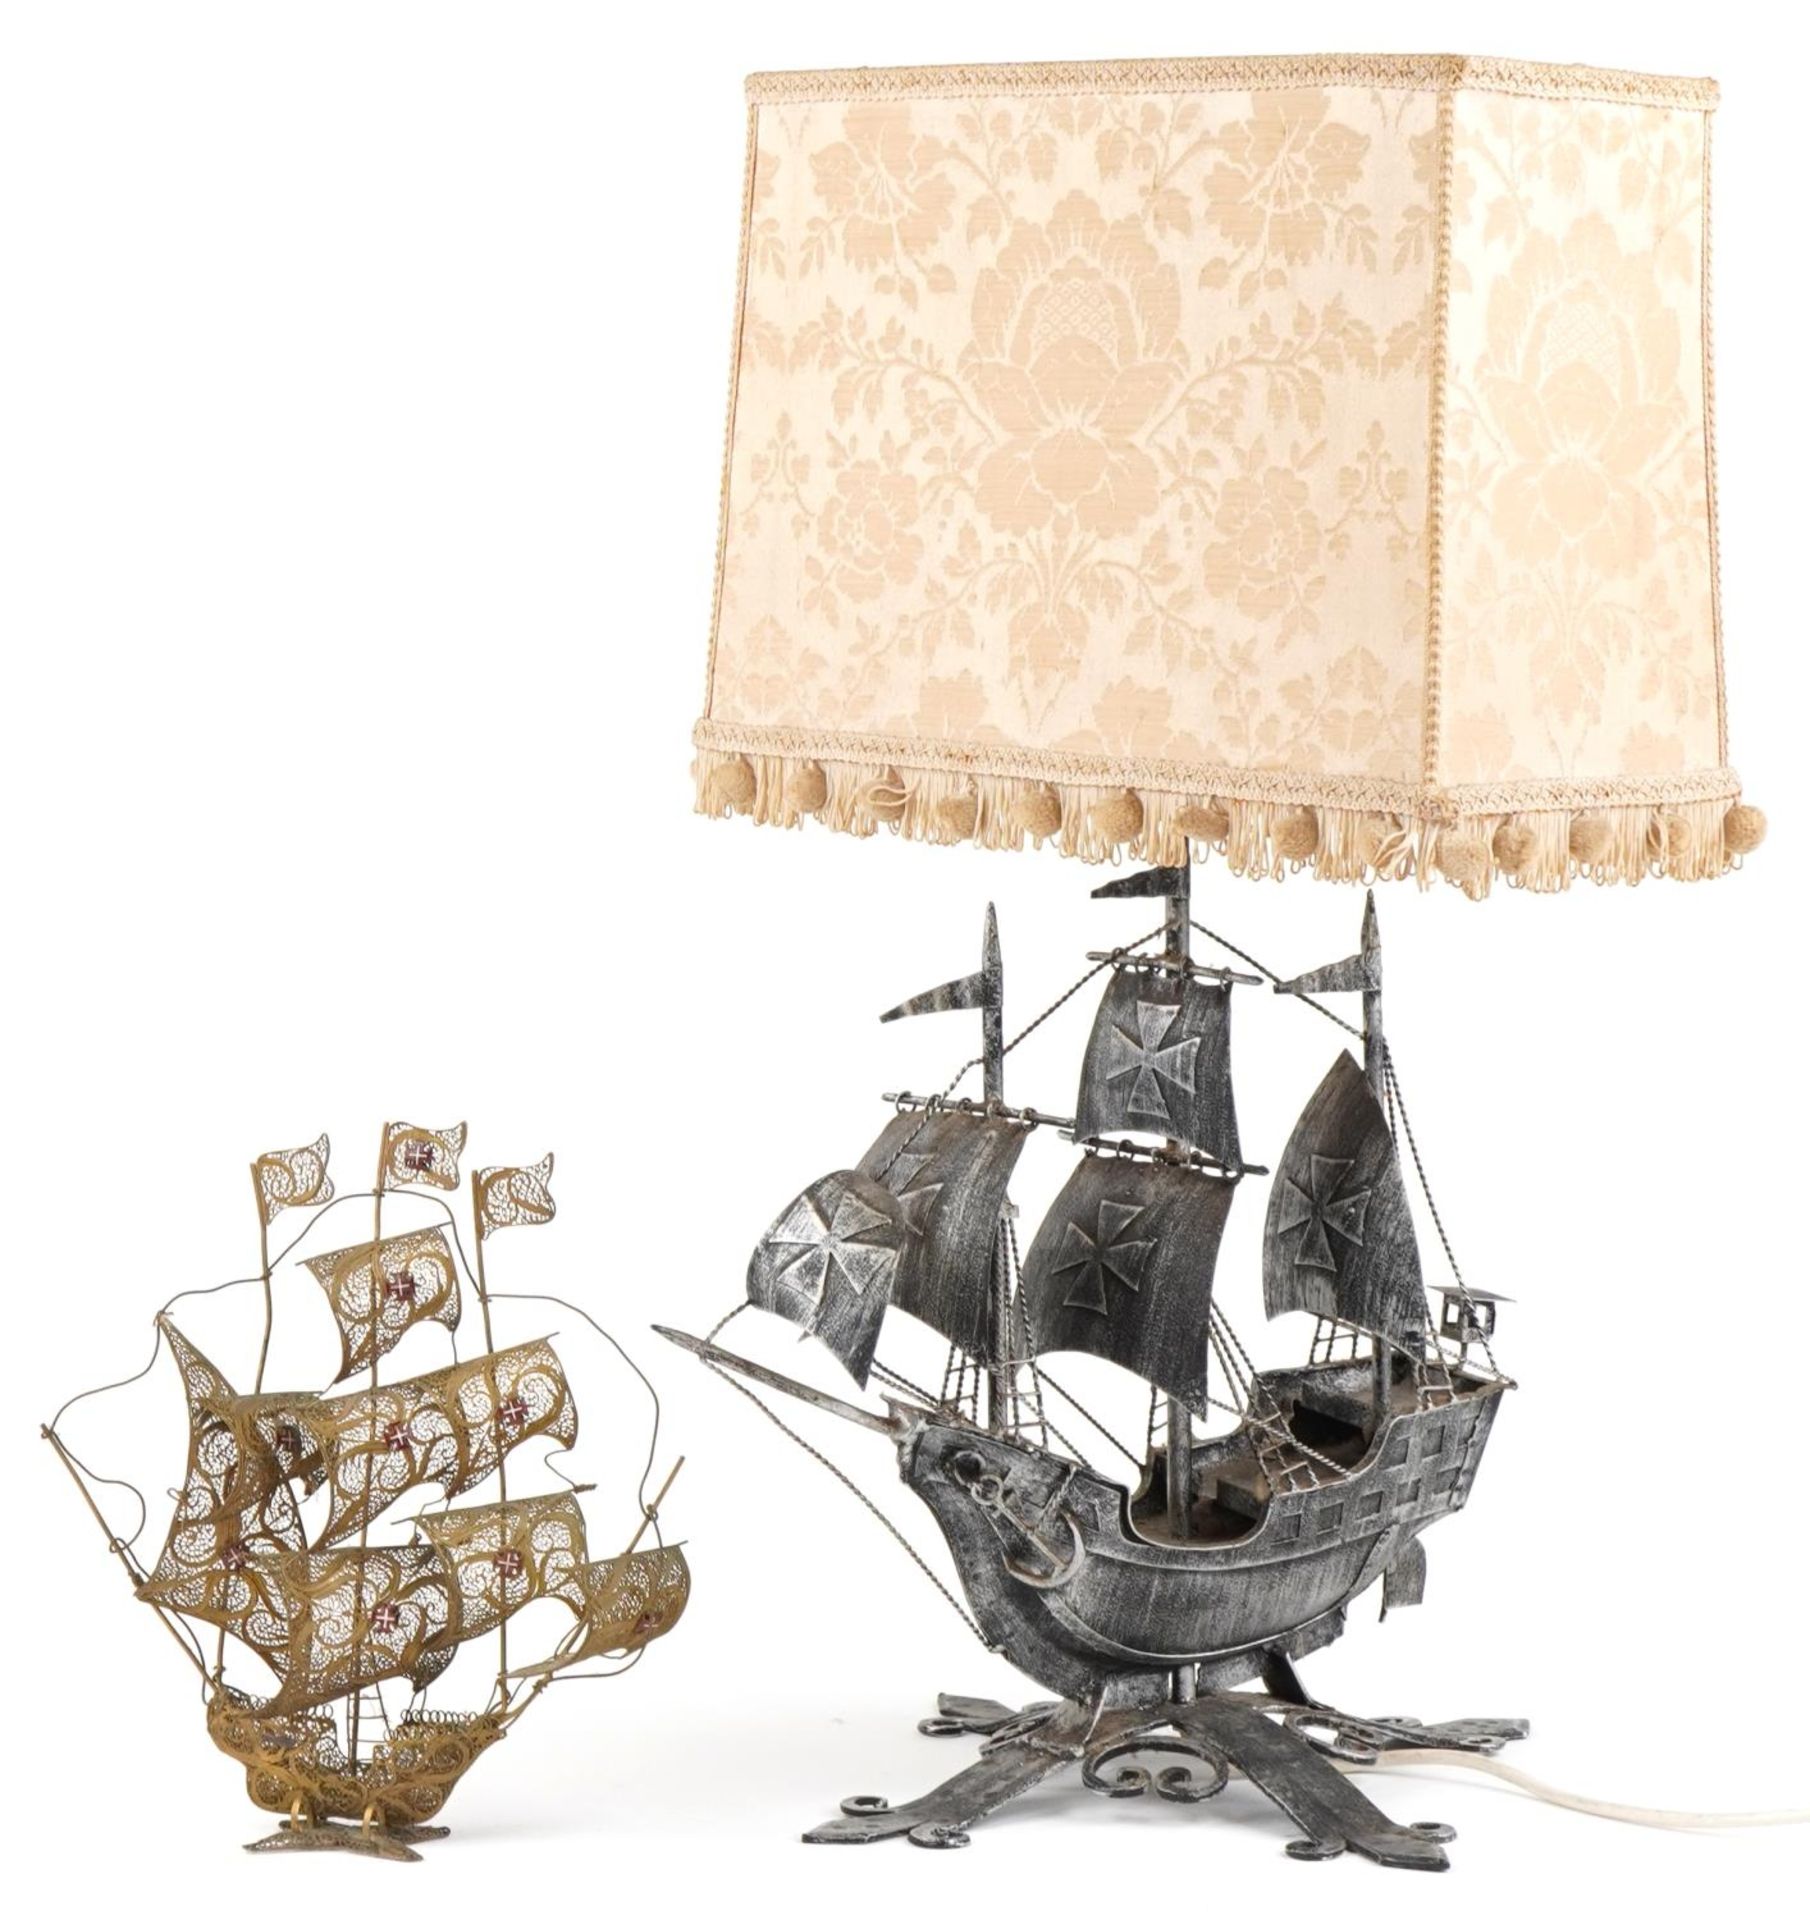 Silvered cast metal Maltese ship table lamp with shade and a similar gilt filigree sculpture, the